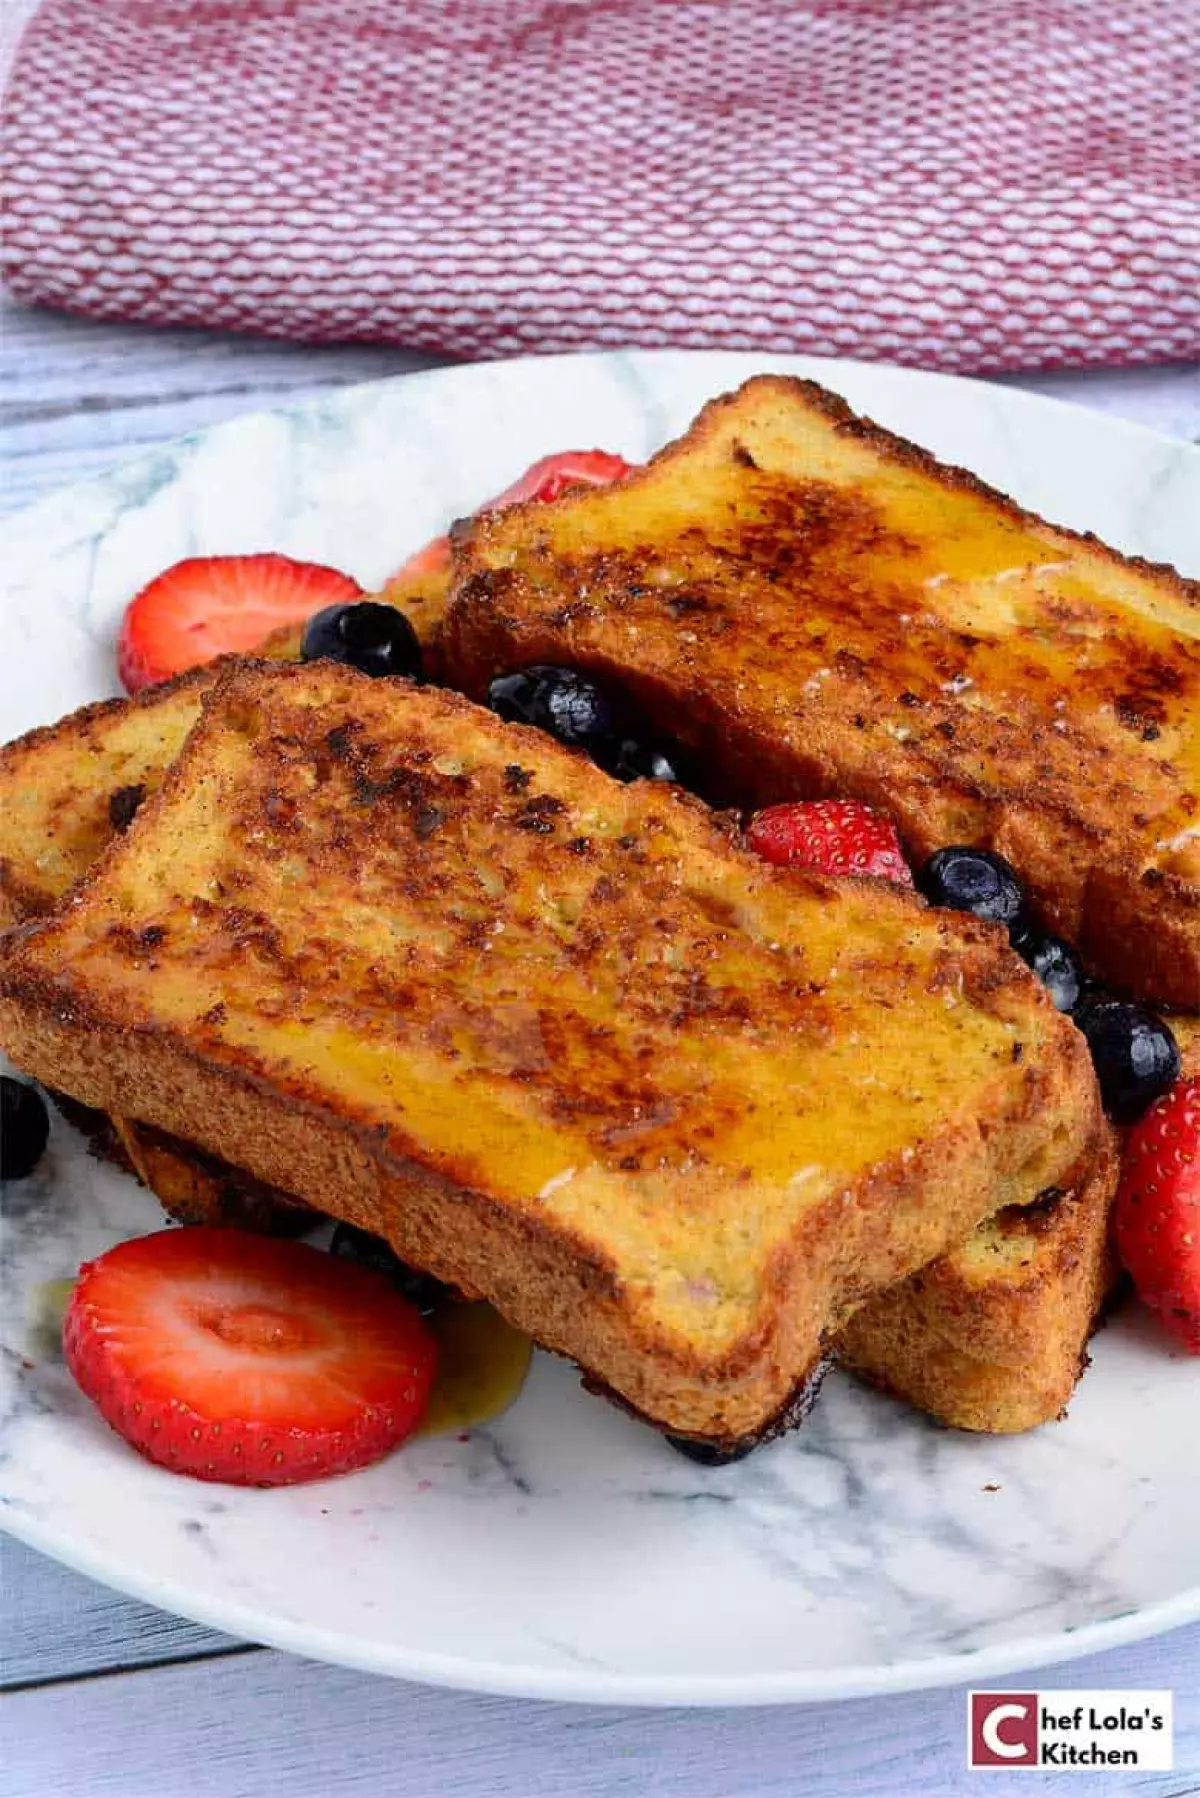 Oven baked french toast garnished with berries